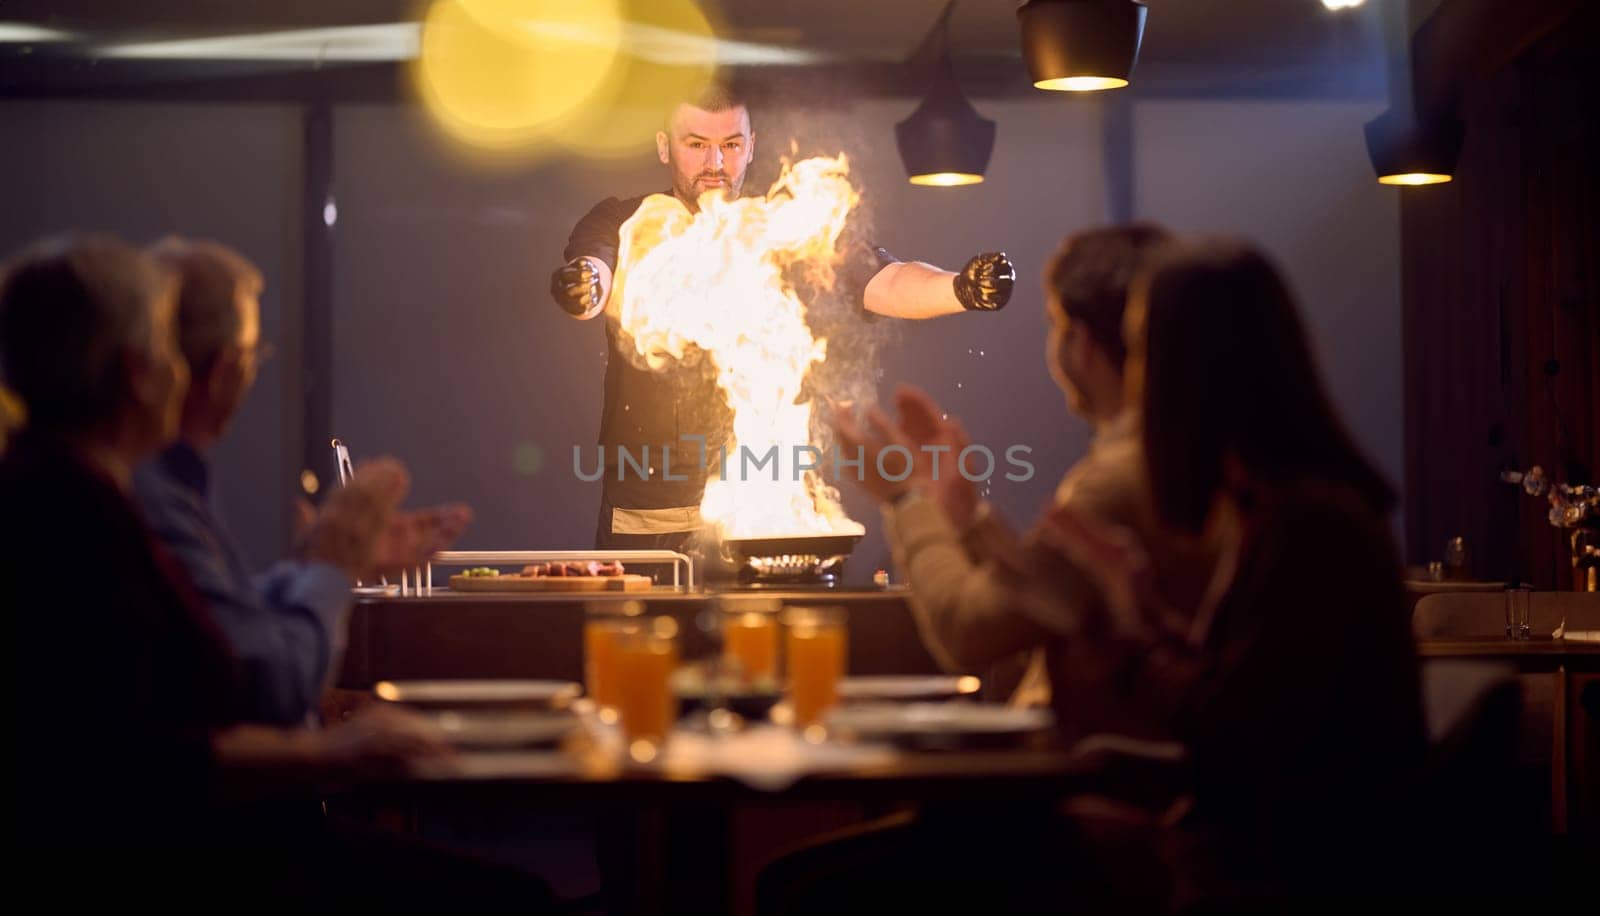 In a restaurant setting, a professional chef presents a sizzling steak cooked over an open flame, while an European Muslim family eagerly awaits their iftar meal during the holy month of Ramadan, blending culinary artistry with cultural tradition in a harmonious dining experience by dotshock